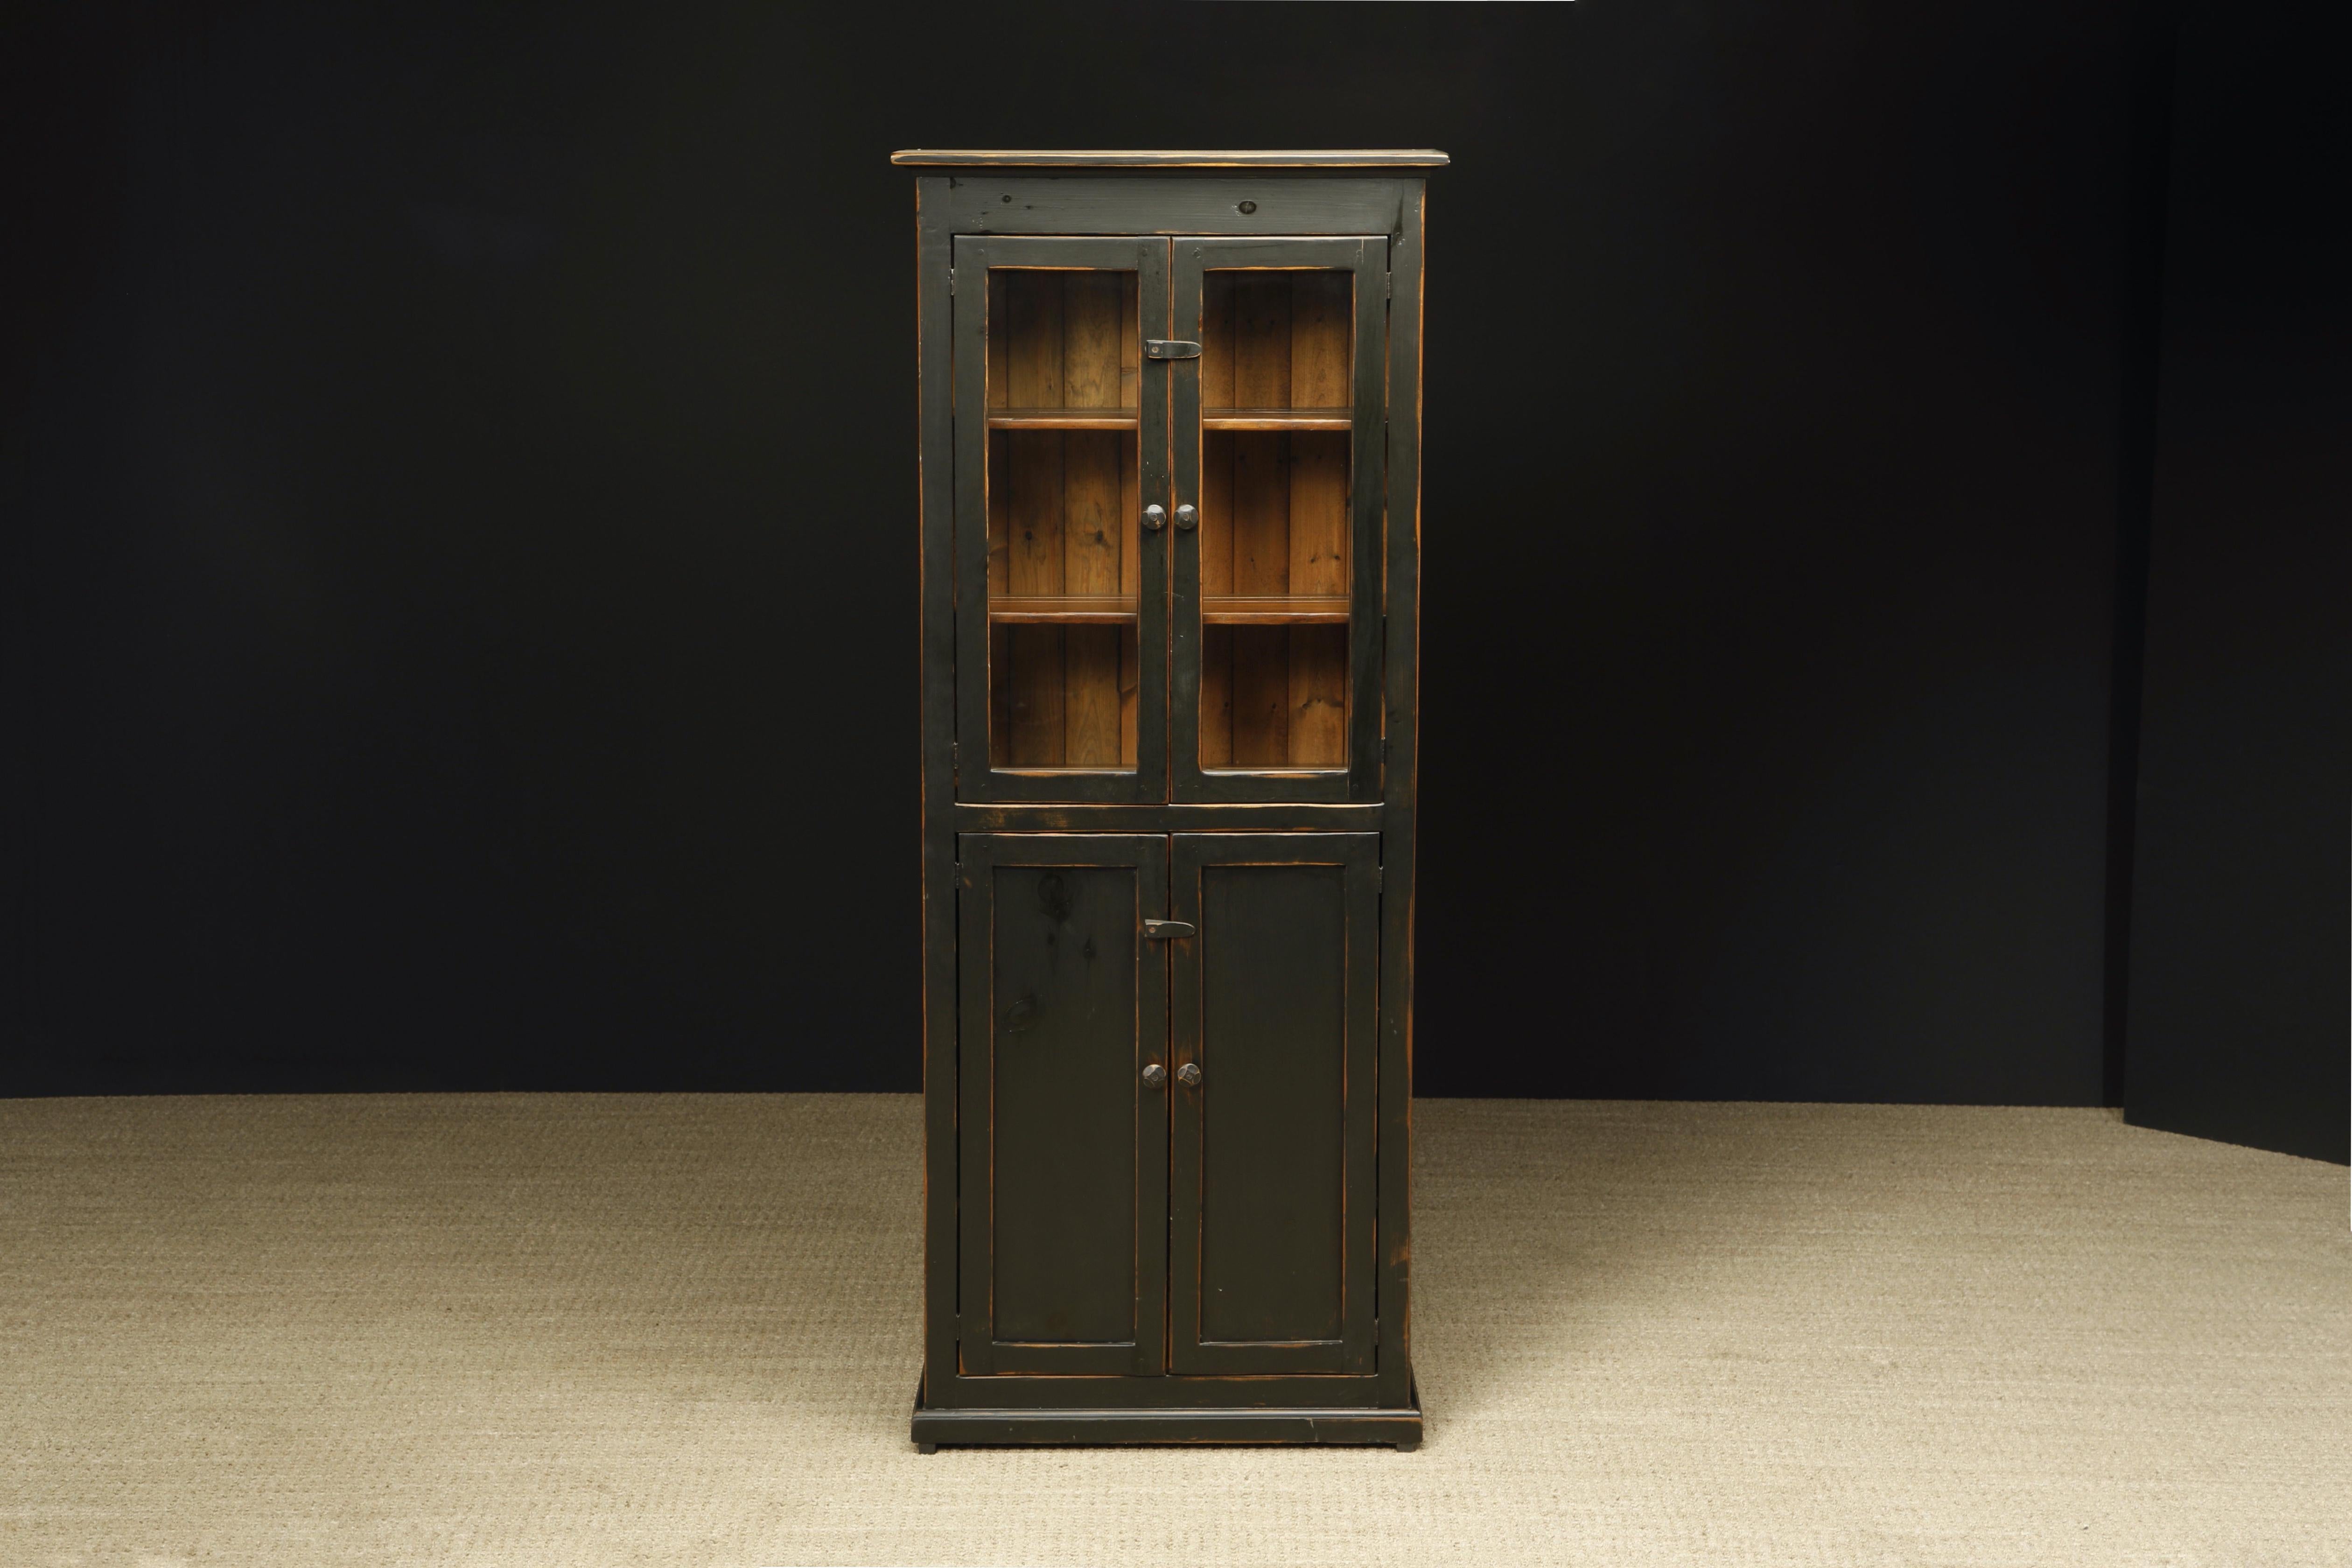 A lovely painted Pine cabinet in a rustic style featuring an intentionally aged look with two glass framed upper cabinet doors opening to two shelves, above two solid wood doors opening to two shelves. 

This beautiful painted pine cupboard